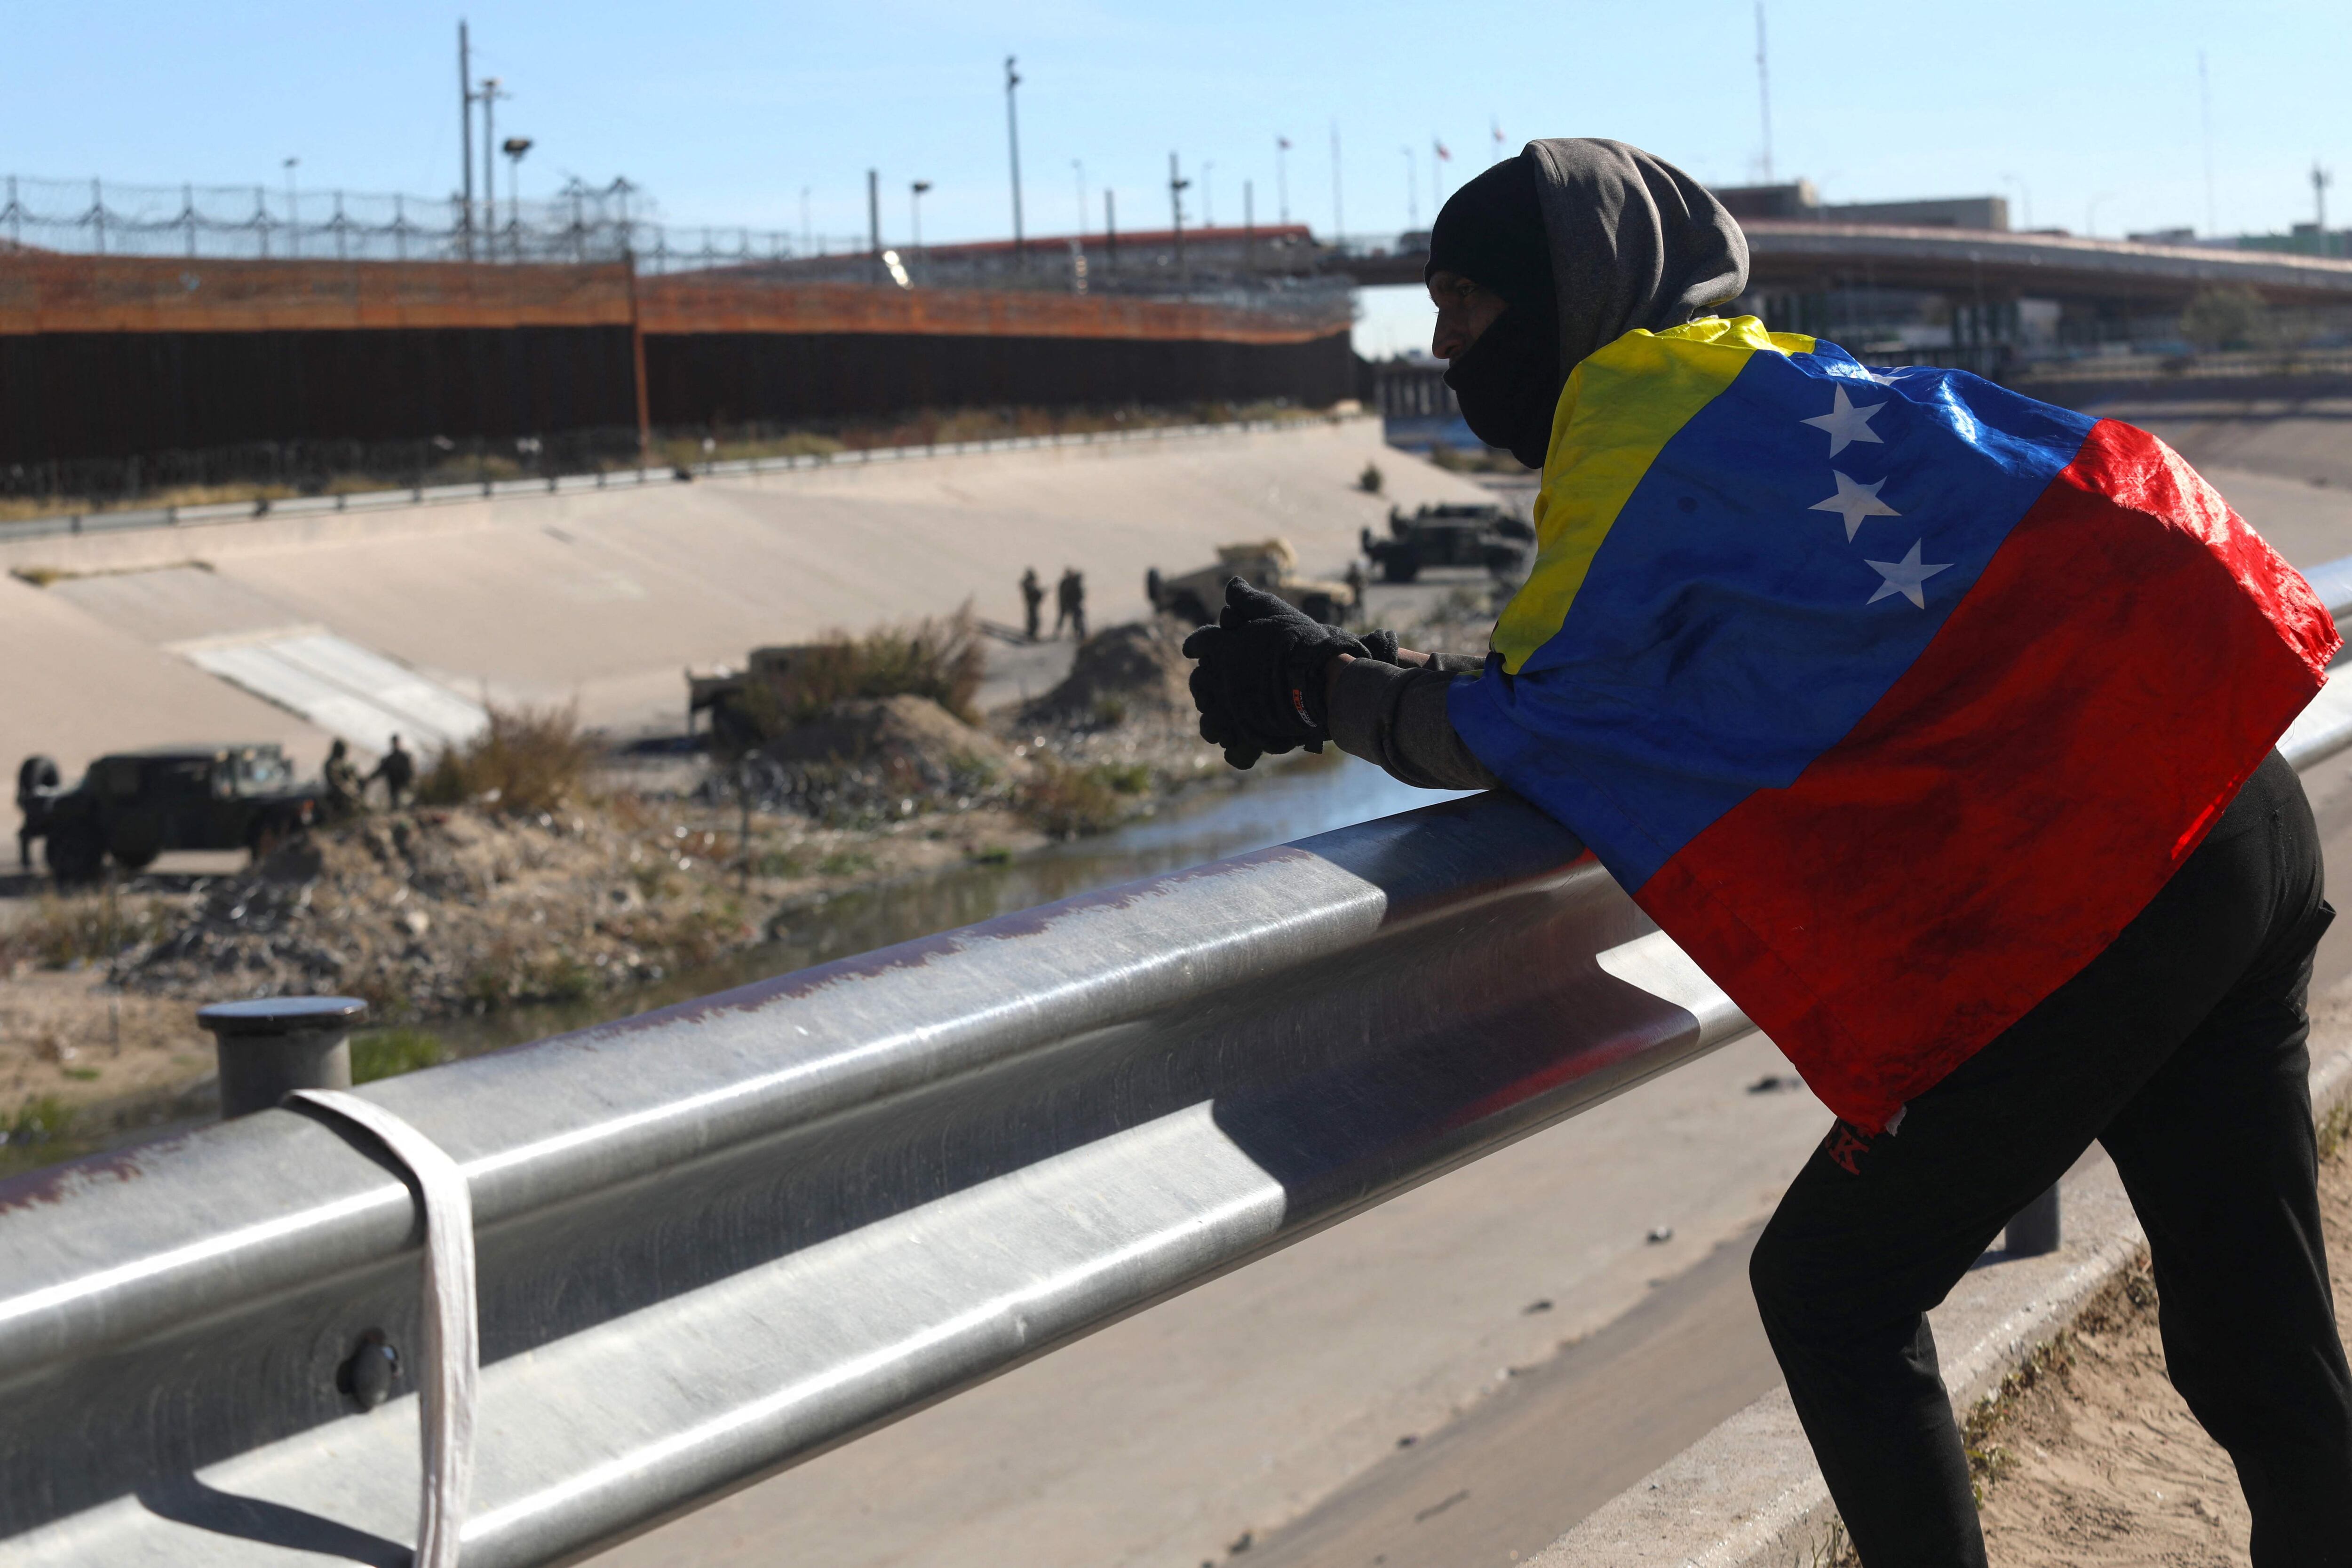 A Venezuelan migrant looks towards the United States wrapped in his country's flag as he waits for the opportunity to cross from Ciudad Juárez, Chihuahua state, Mexico, in December 2022.